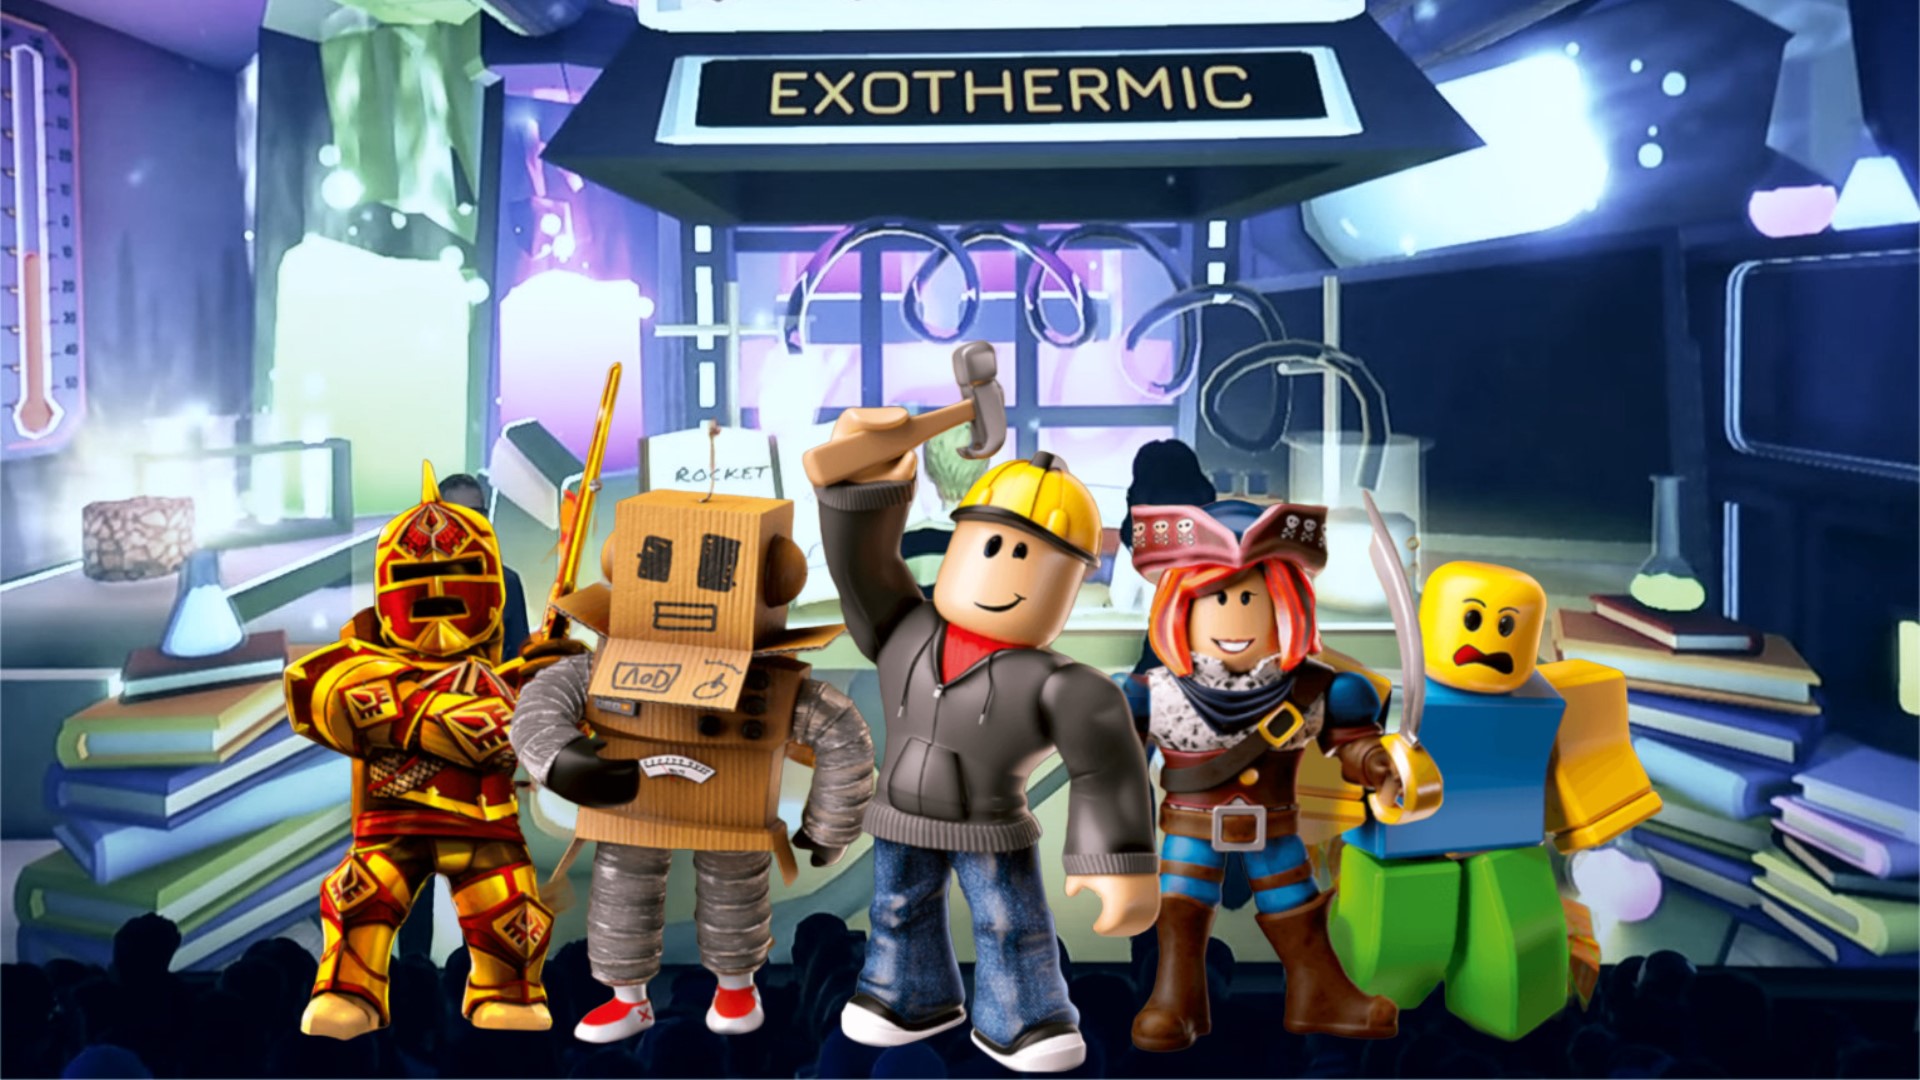 Roblox To Allow User-Created Avatar Bodies “In The Coming Months